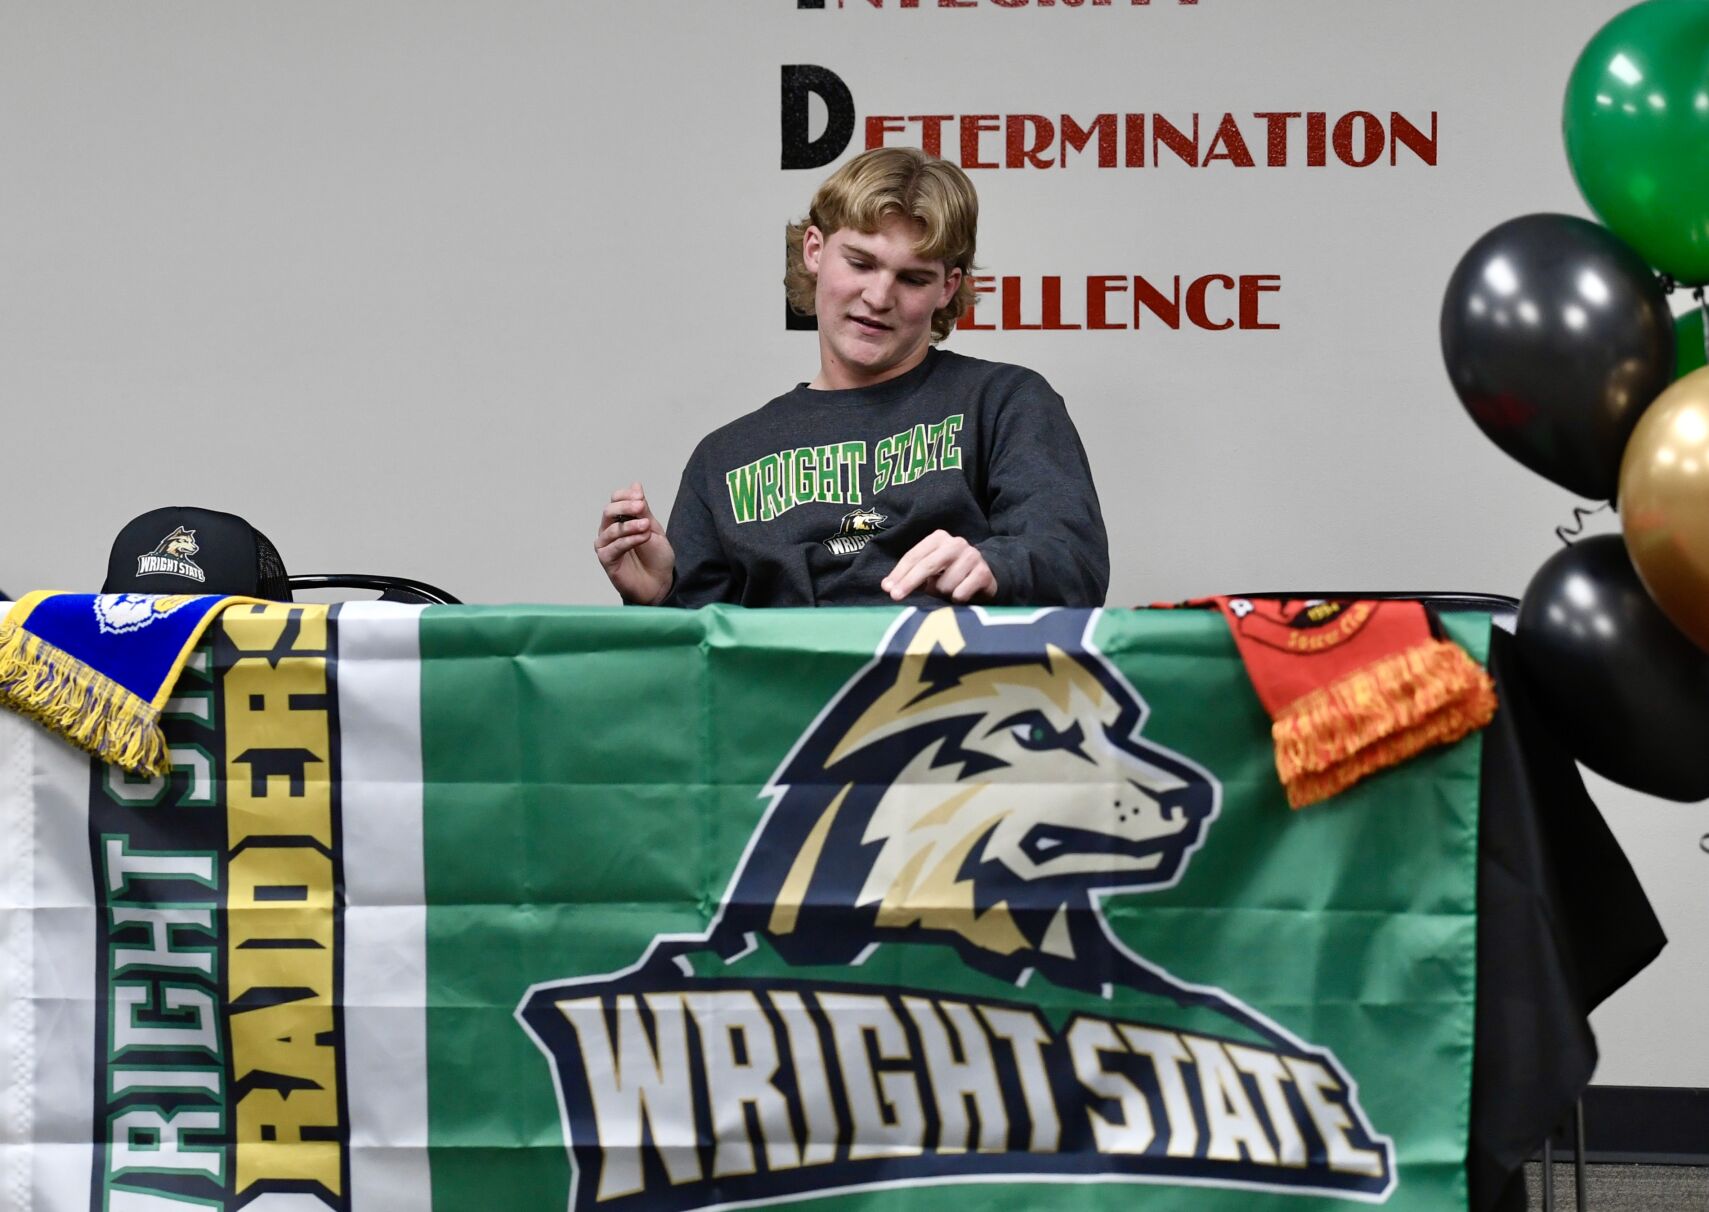 Brayden Tester: From Germany to Wright State – A Soccer Journey